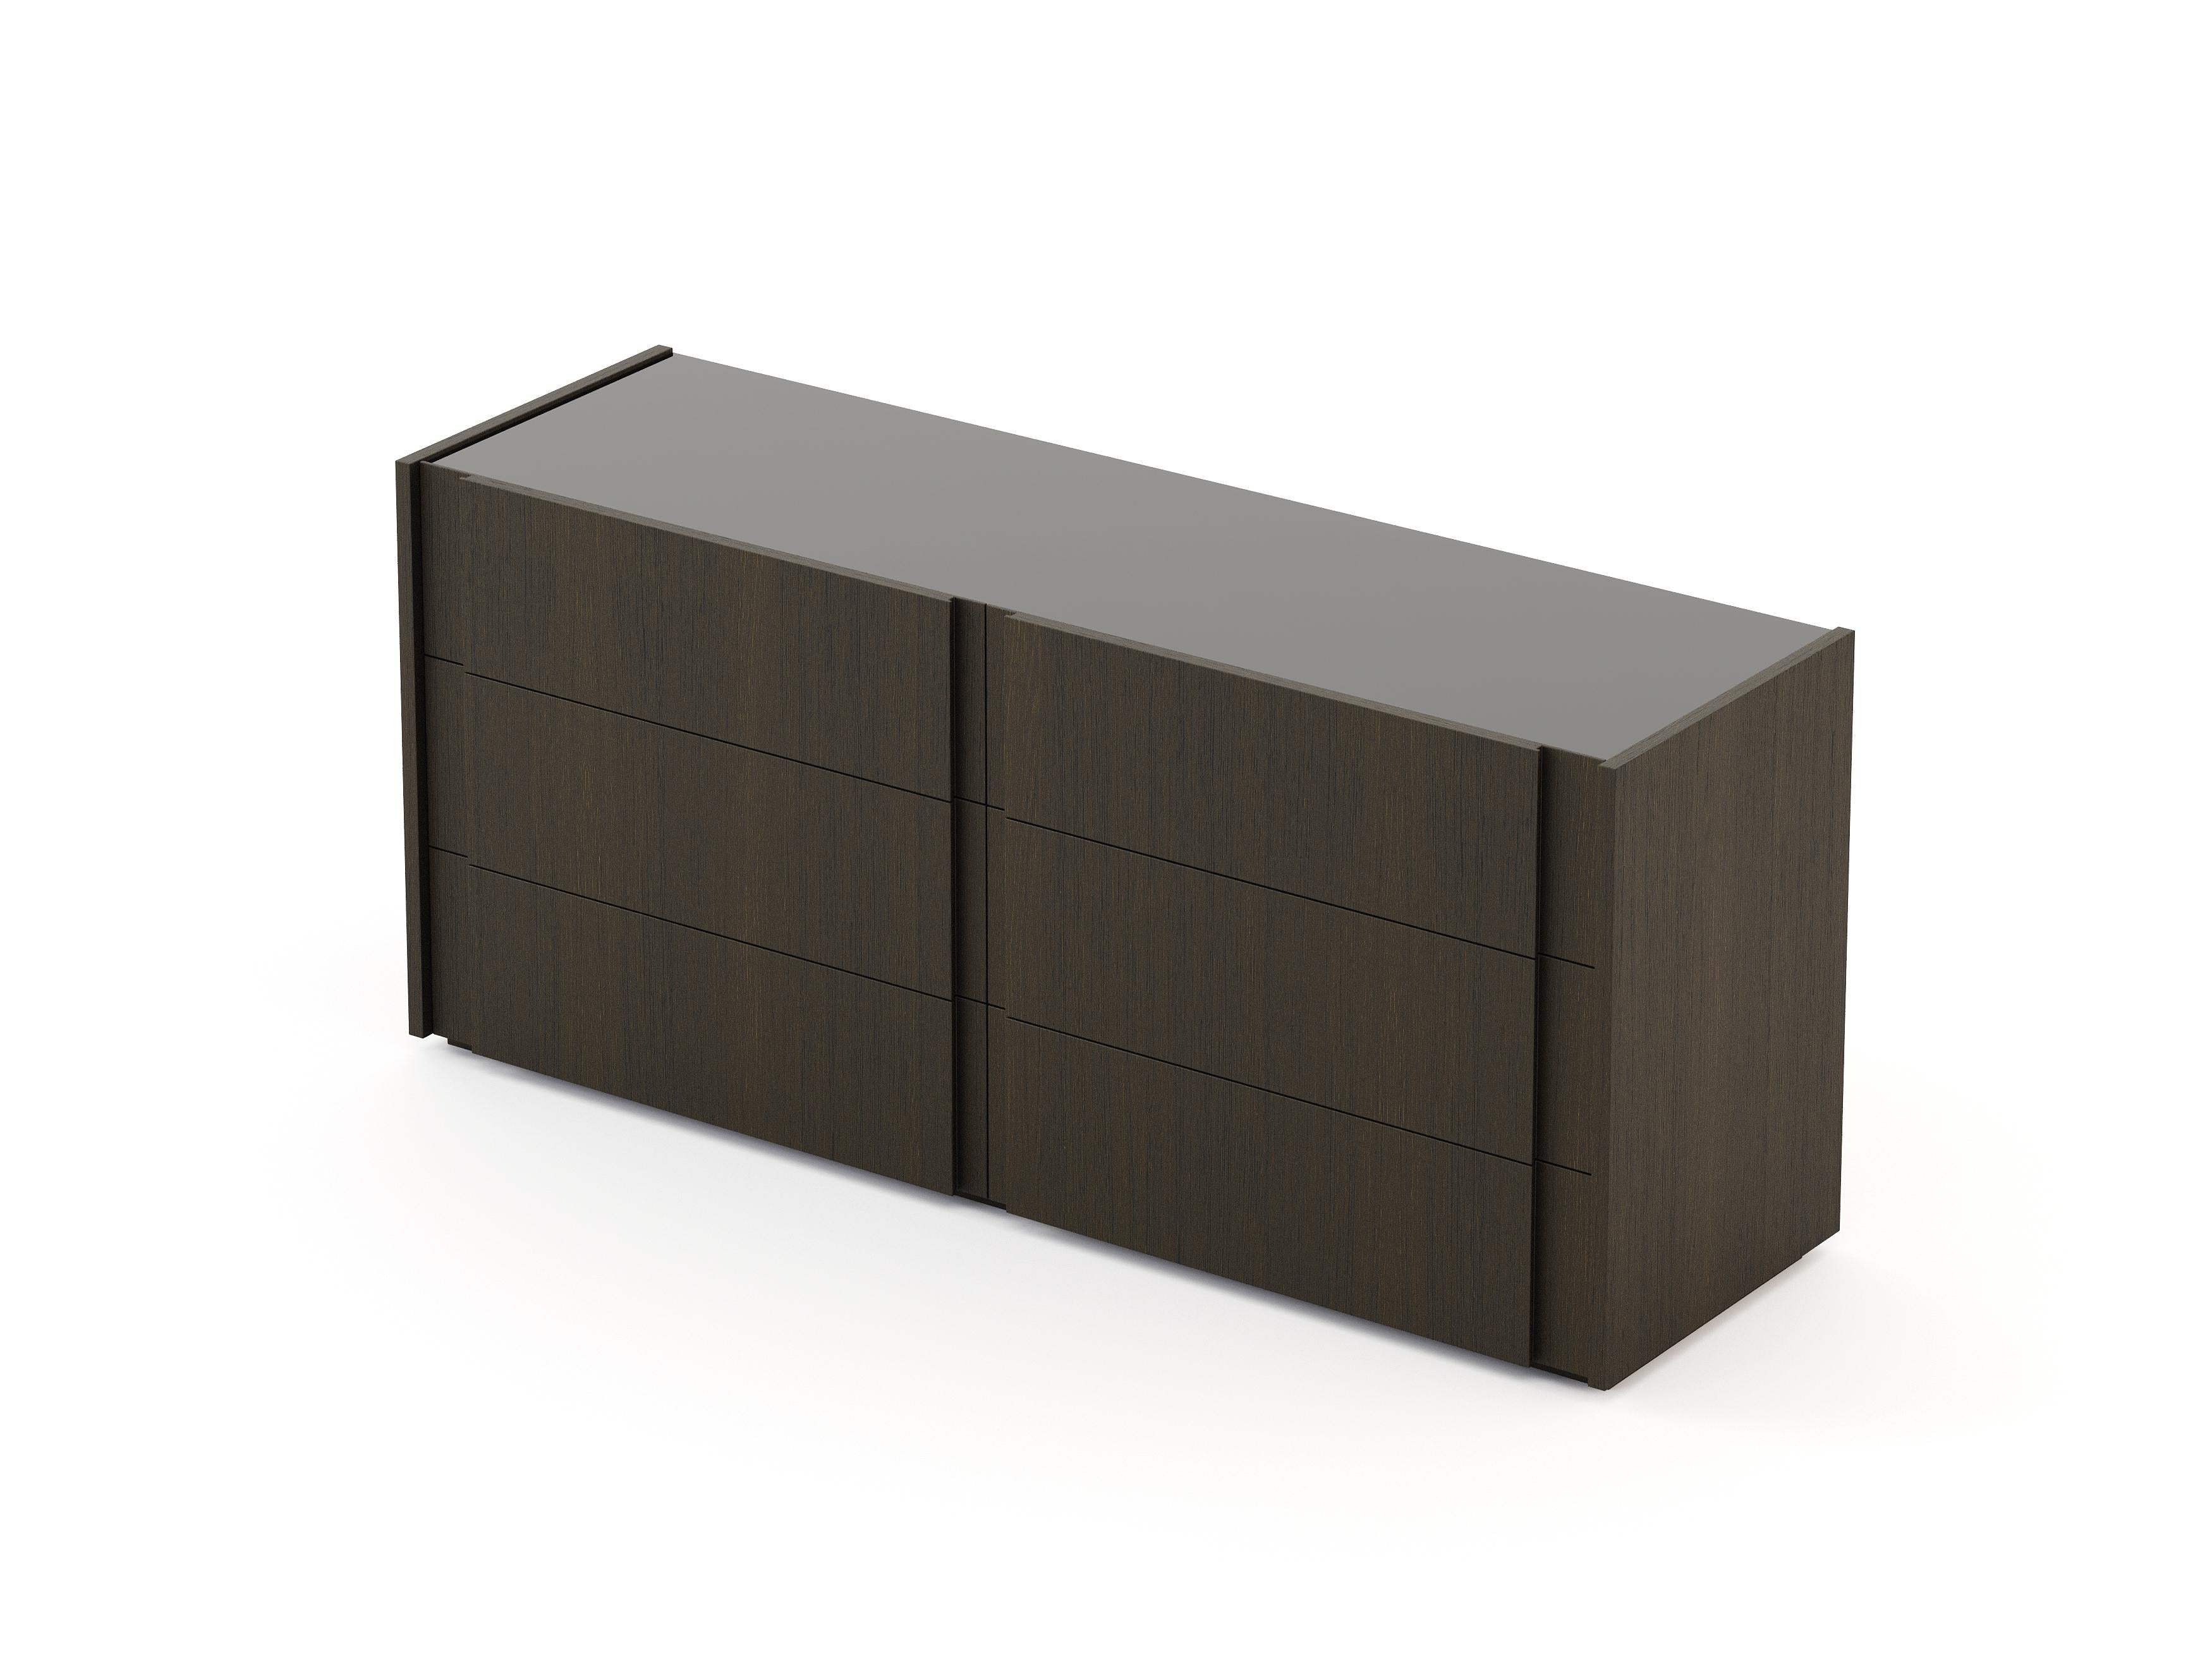 Portuguese Modern Sevilha Chest of Drawers Made With Oak and Glass by Stylish Club For Sale